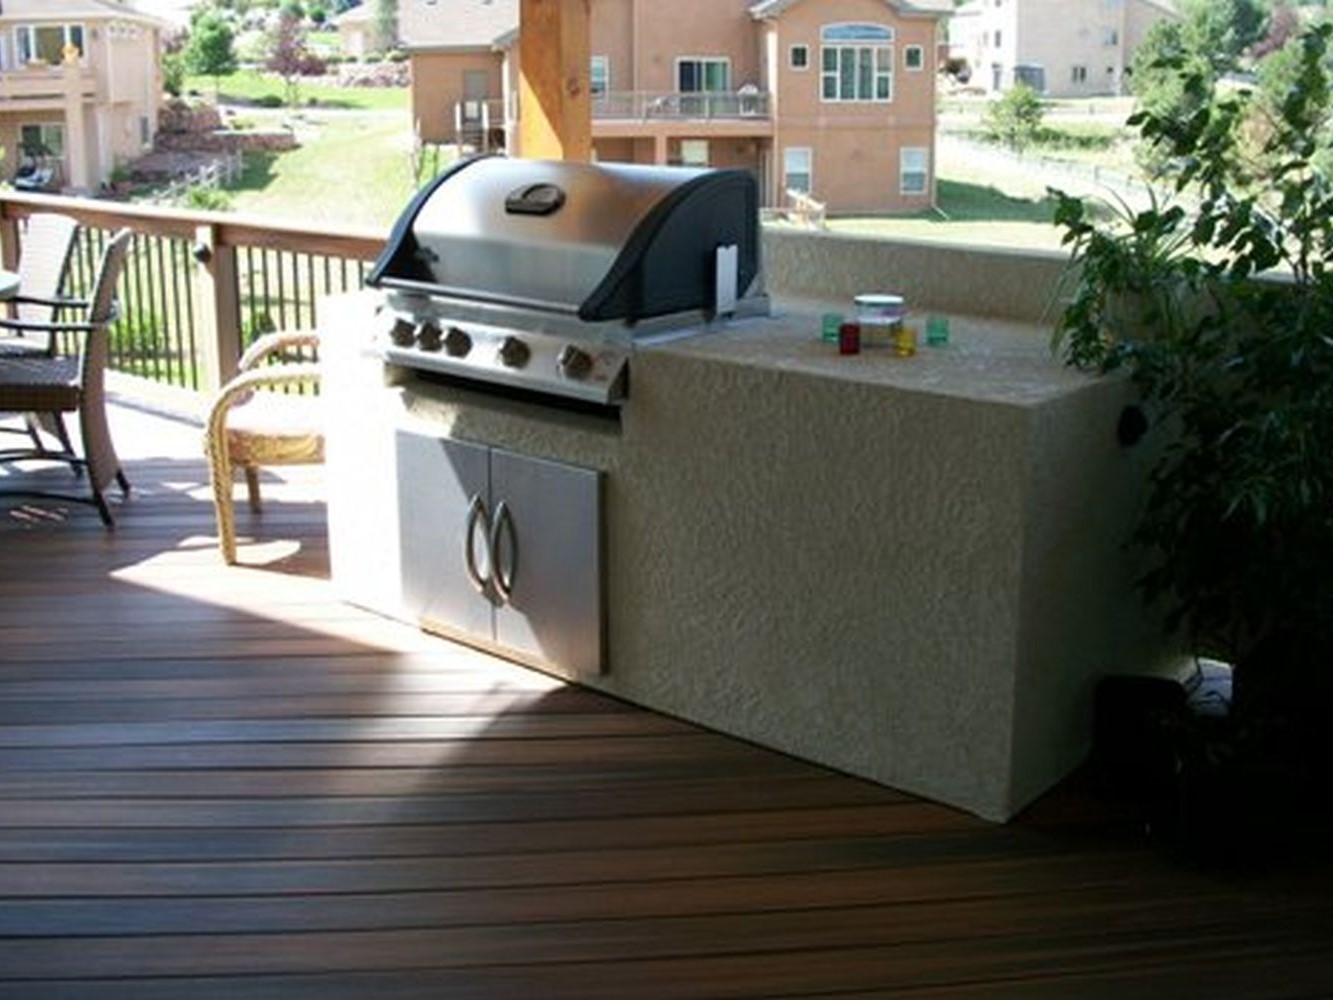 Stucco enclosed grill with preparation area and storage cabinet.